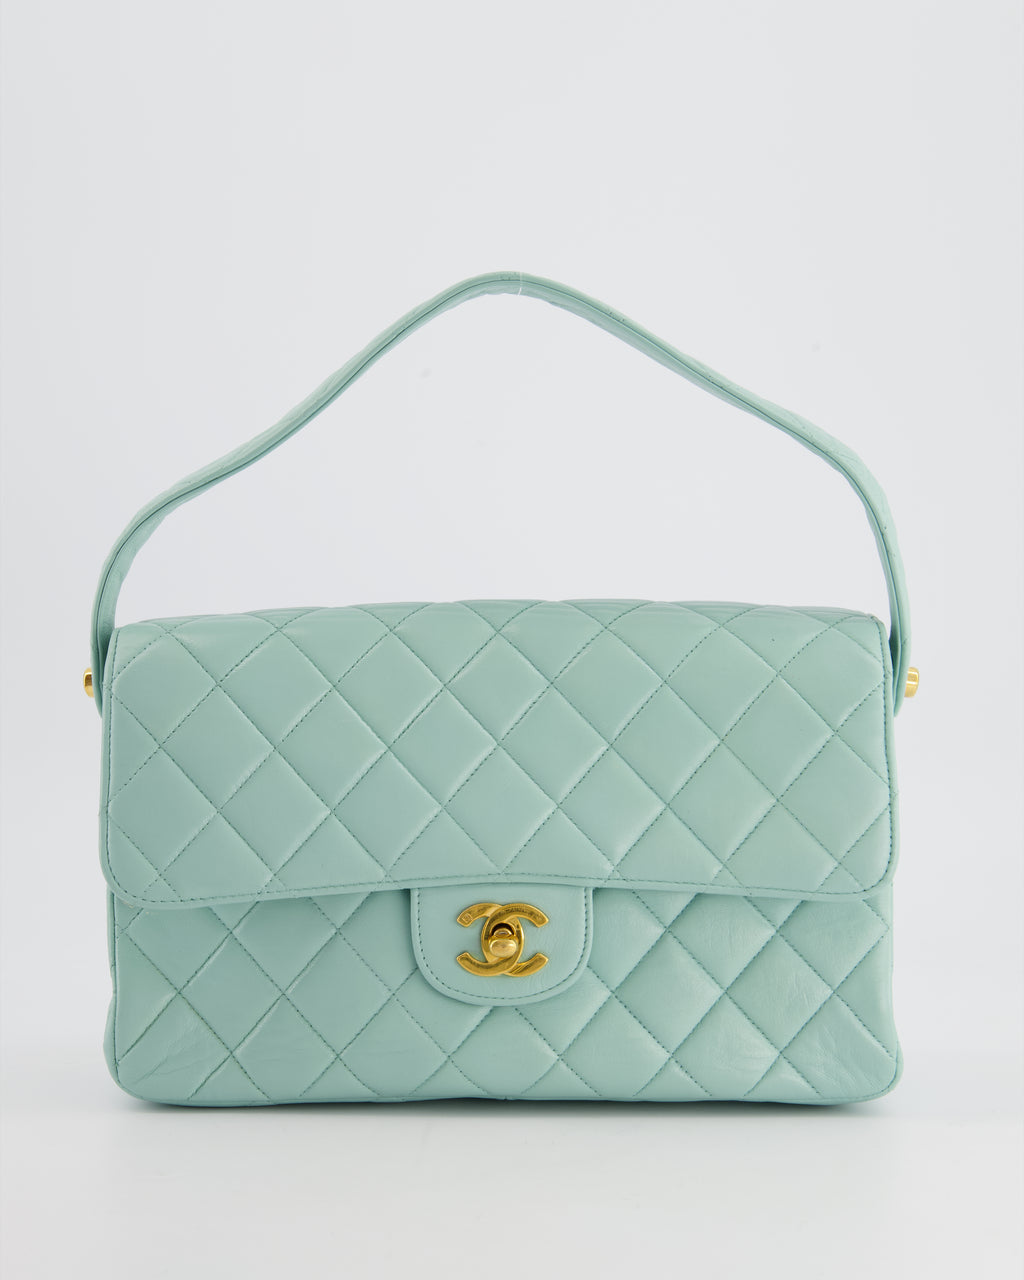 Chanel Vintage Light Blue Double Faced Flap Bag with 24K Gold